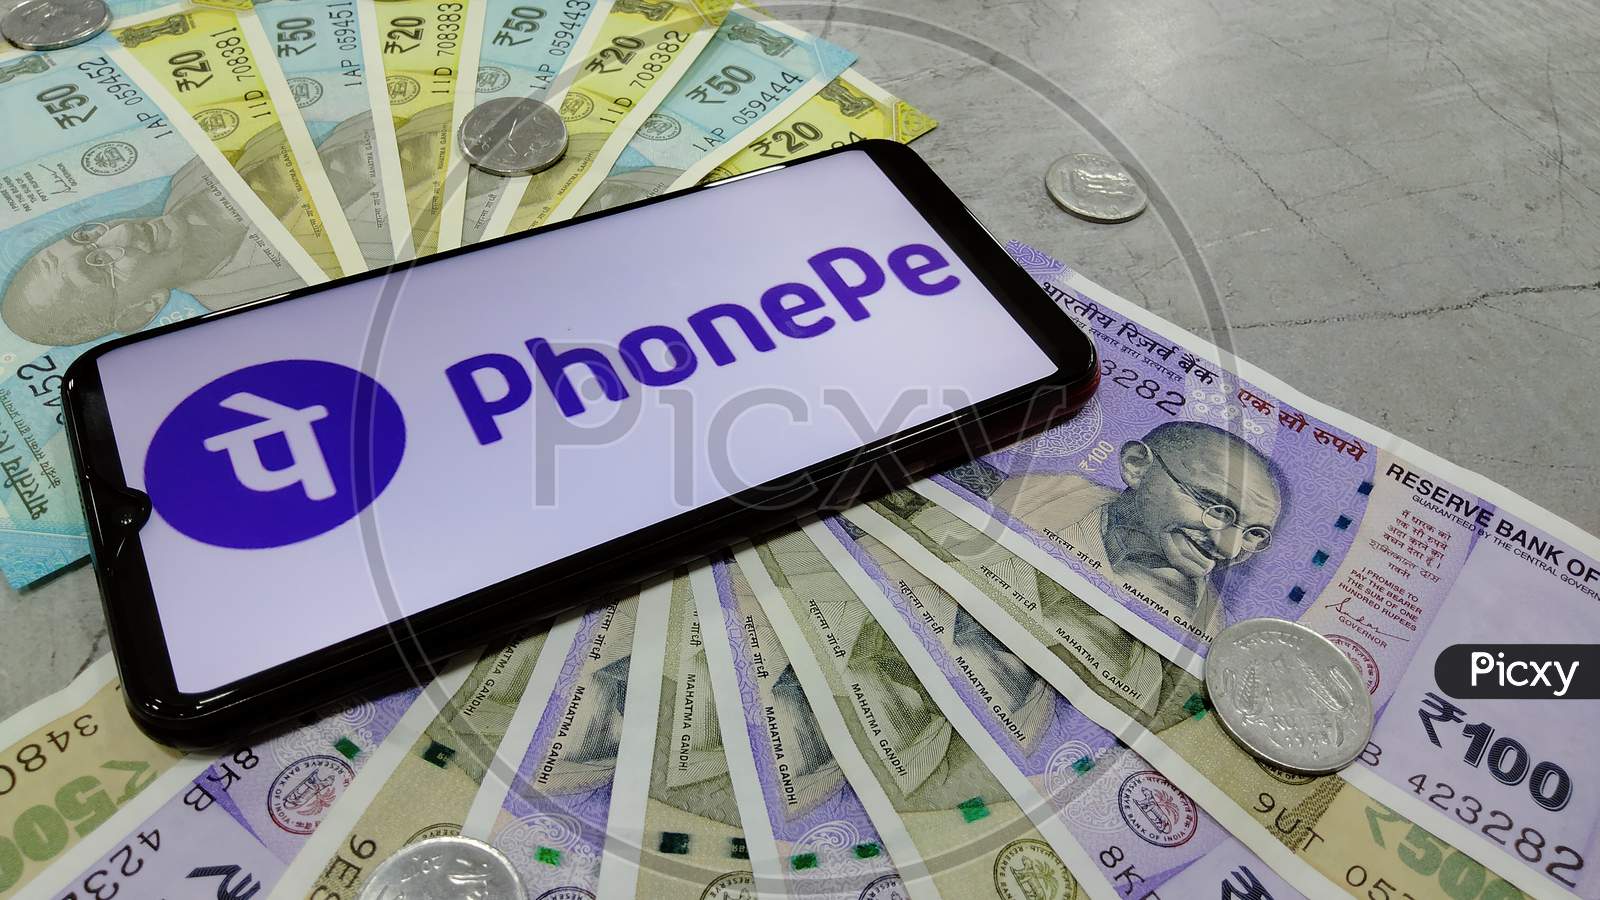 Tamil Nadu, India - January 21 2021: Indian currency notes along with logo of PhonePe on a smart phone